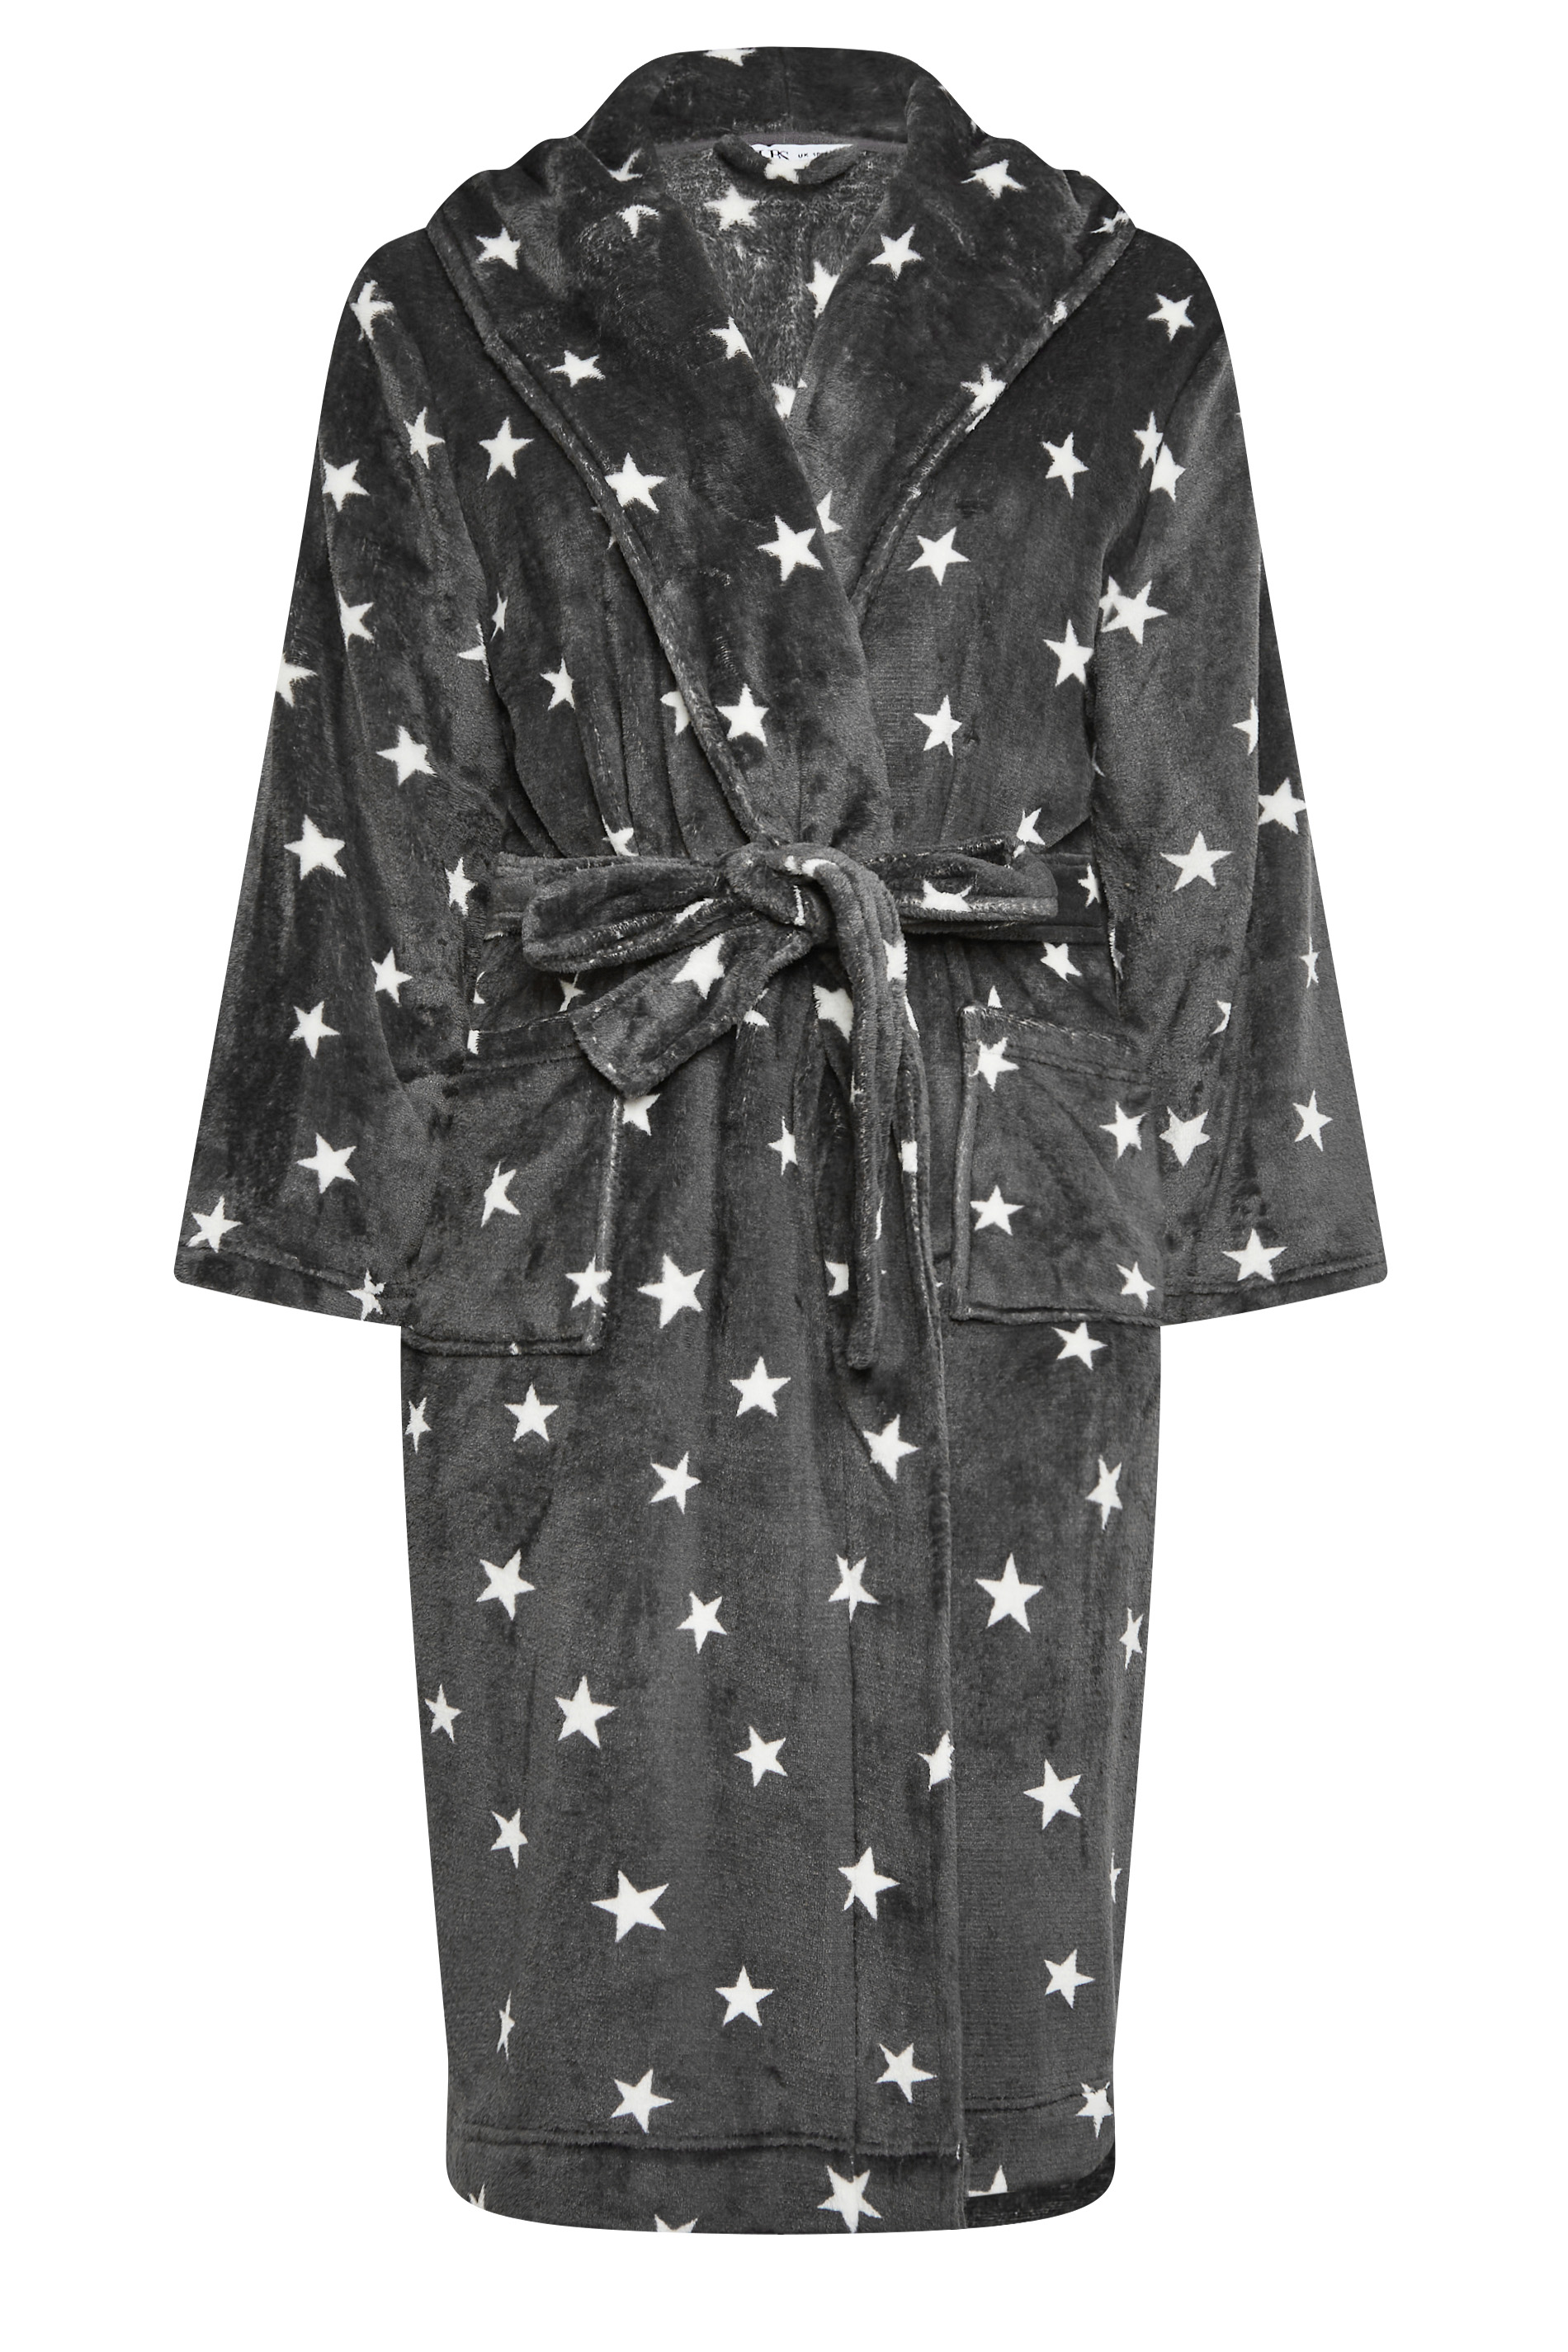 Chelsea Peers Unicorn Robe With Foil Stars in Pink | Lyst